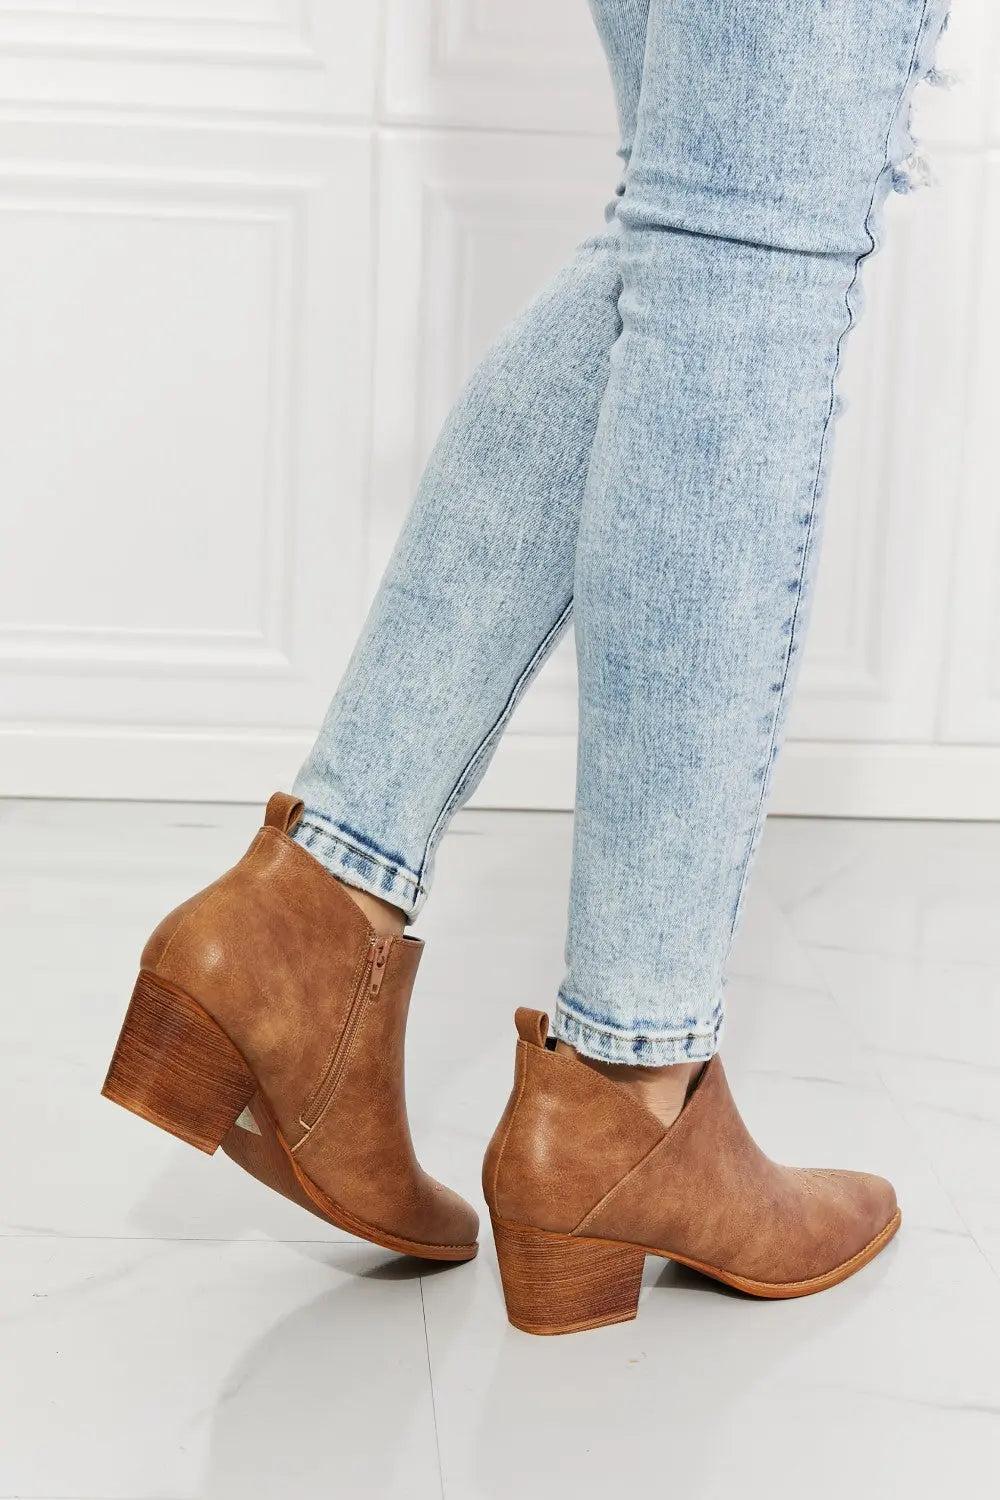 MMShoes Trust Yourself Embroidered Crossover Cowboy Bootie in Caramel - Scarlett's Riverside Boutique 